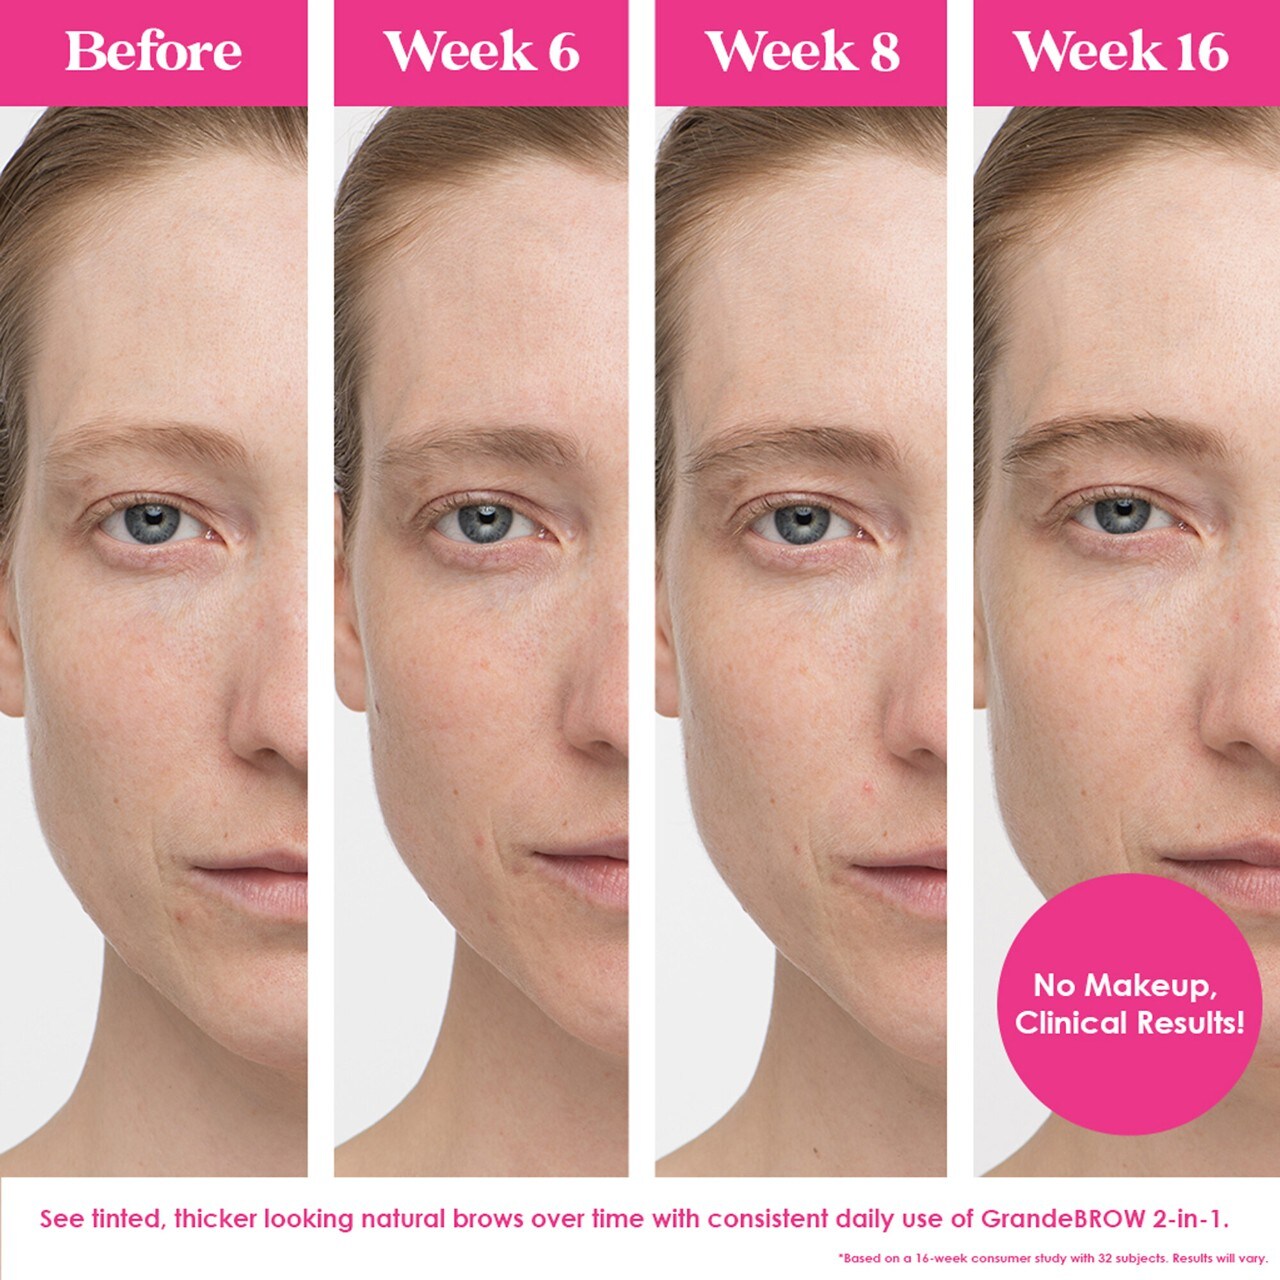 Before and After Week 16 GrandeBrow 2-in-1 - call for details